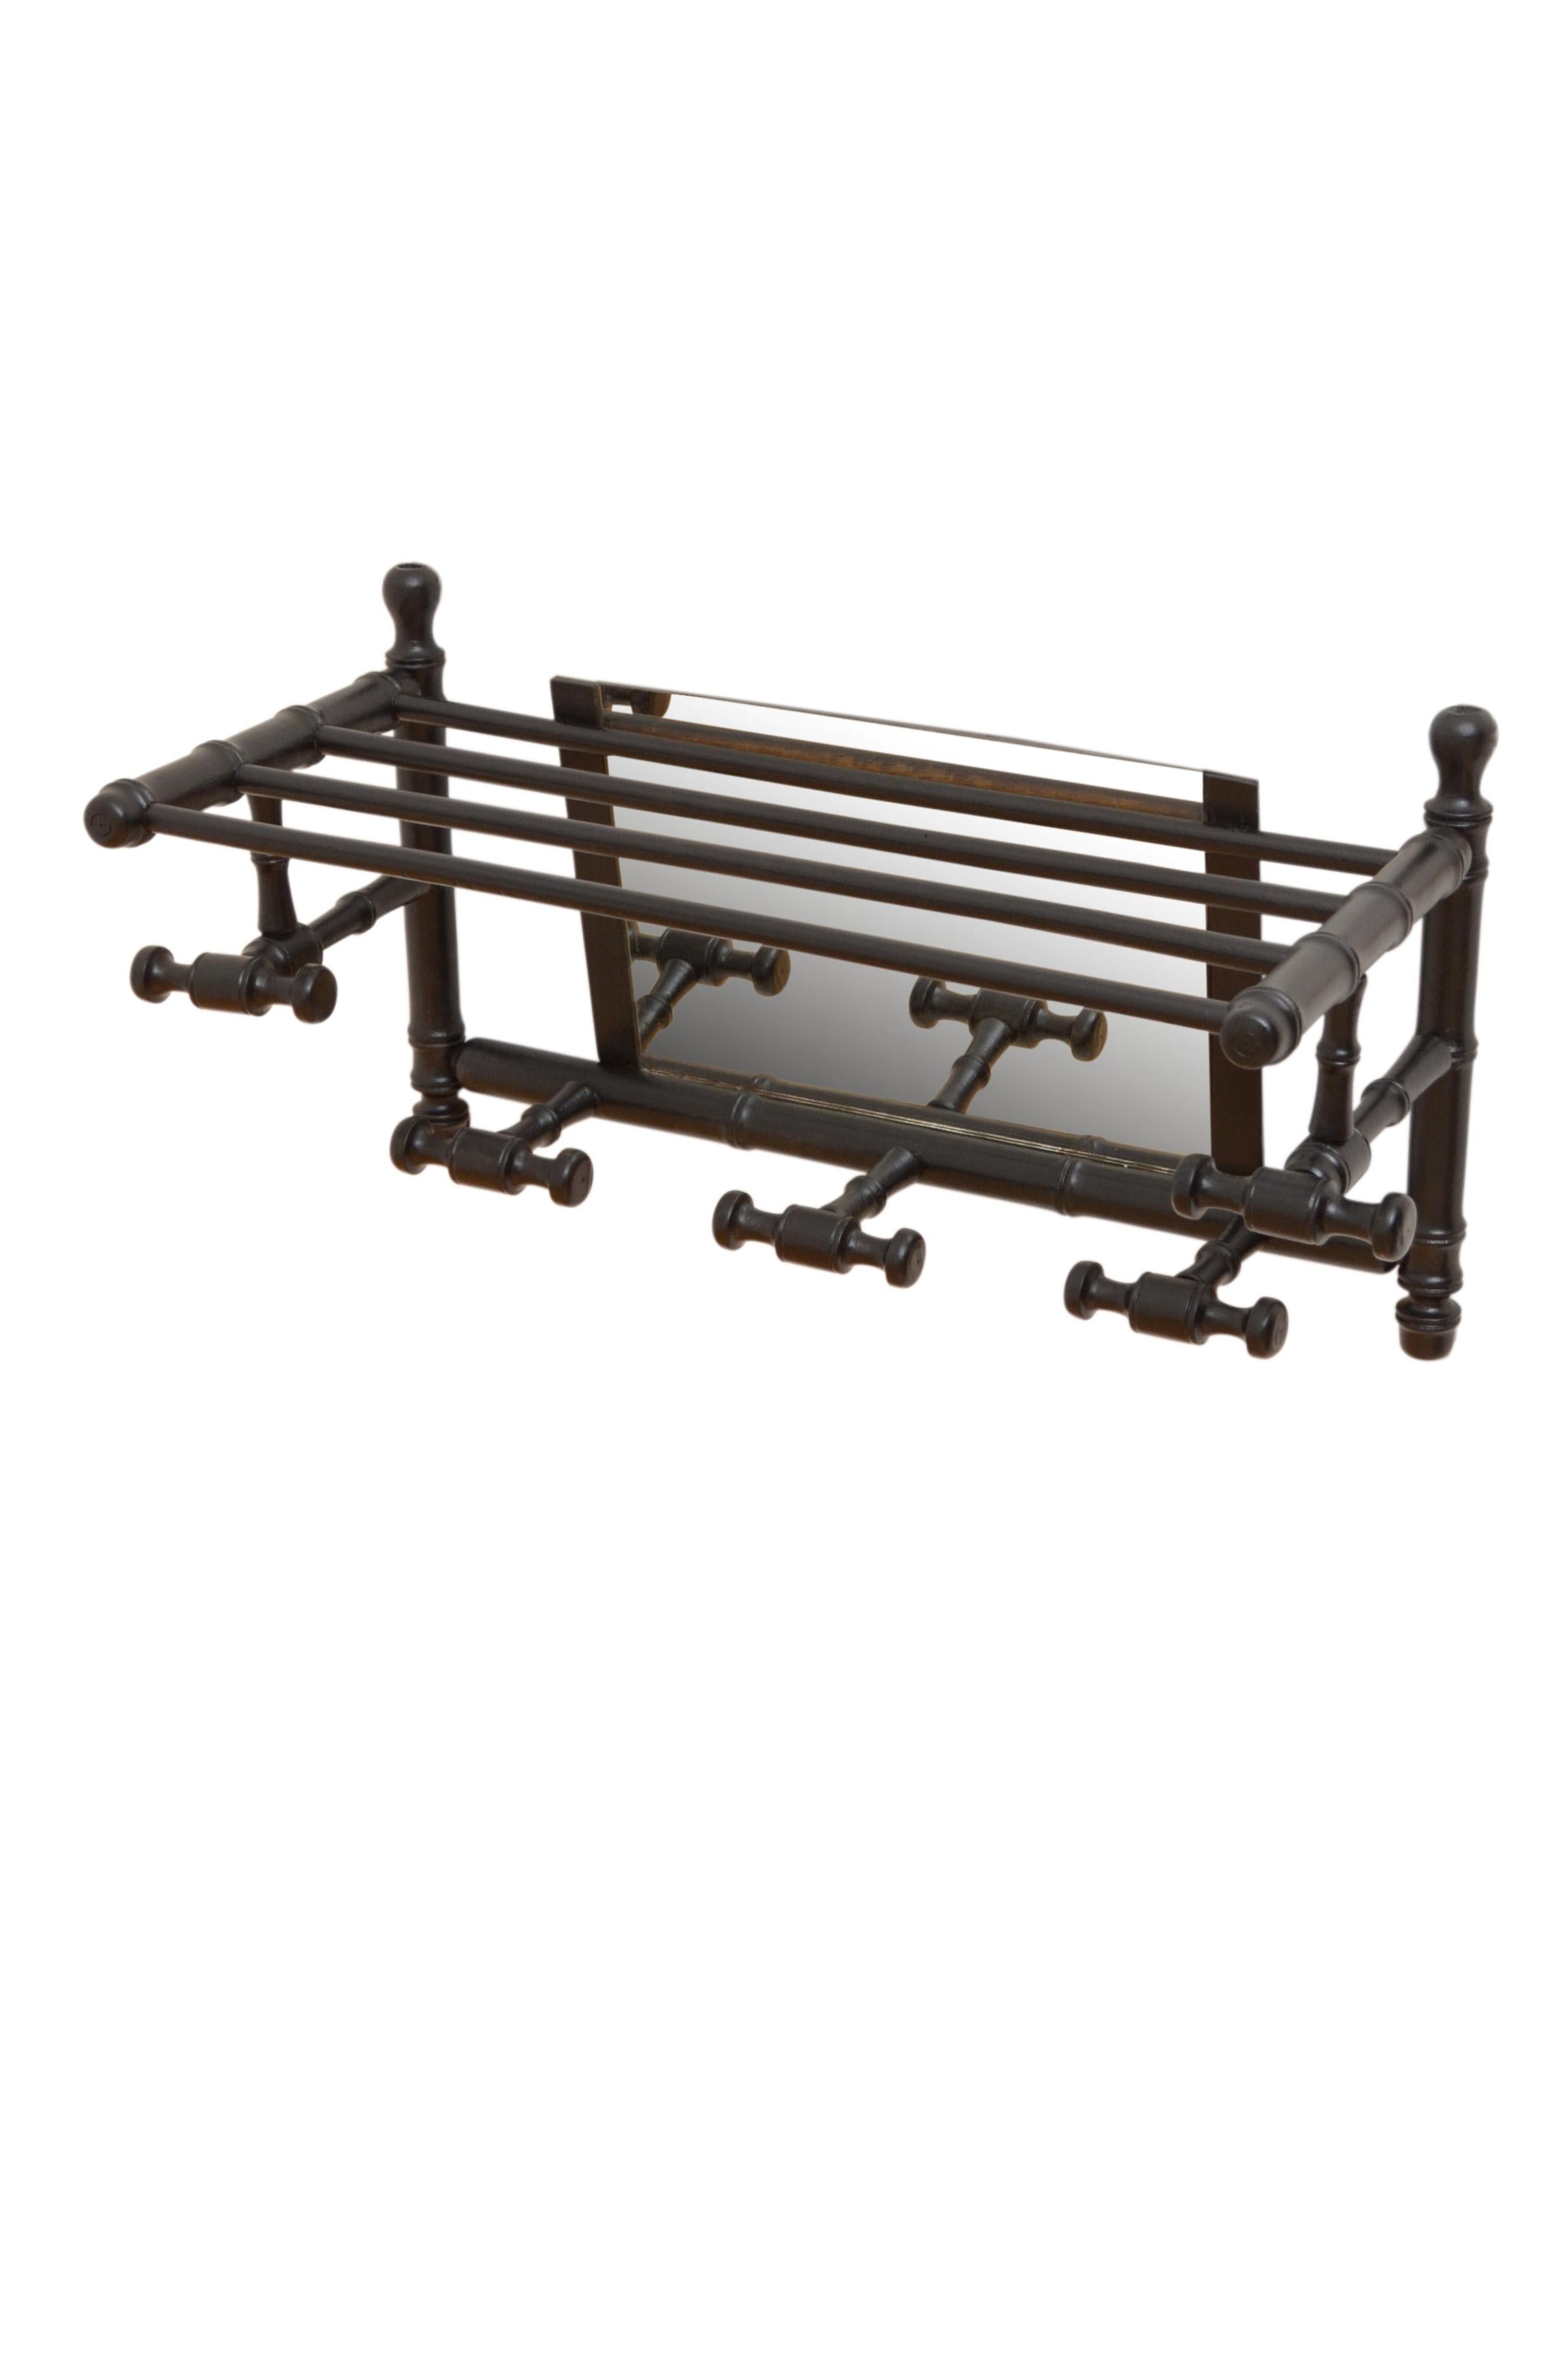 Stylish French faux bamboo, ebonized portmanteau coat and hat rack with an old mirror with some imperfections, all fitted with four hanging brackets. These antique hooks are in home ready condition. No cracks, woodworm free, circa 1900.
Measures: H